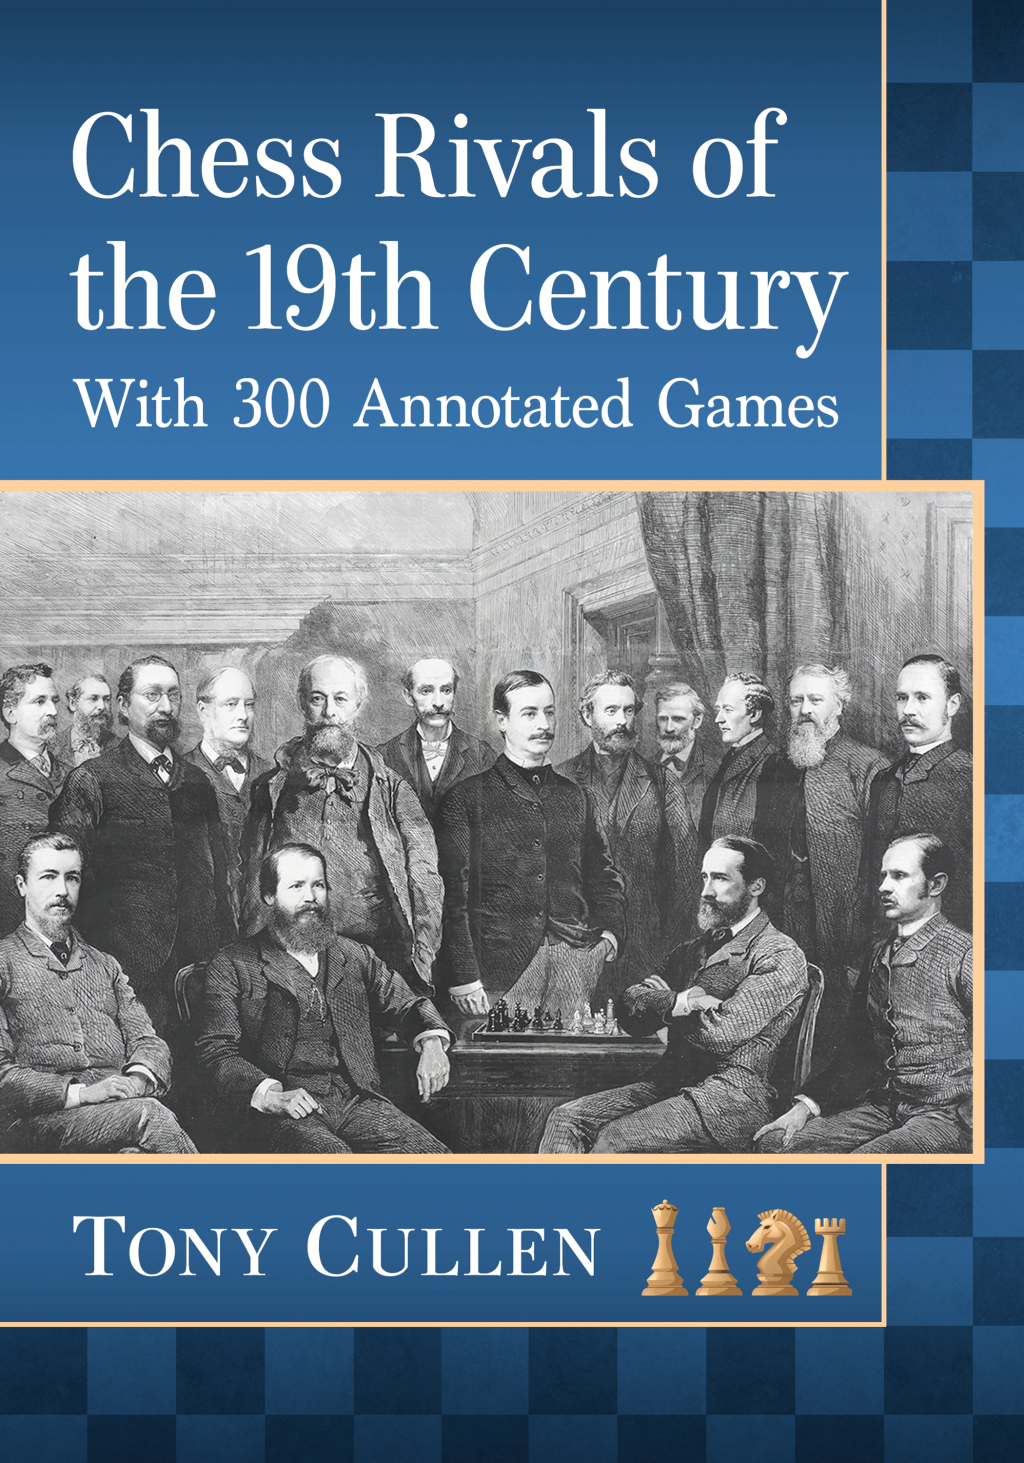 Chess Rivals of the 19th Century (eBook) - Tony Cullen,